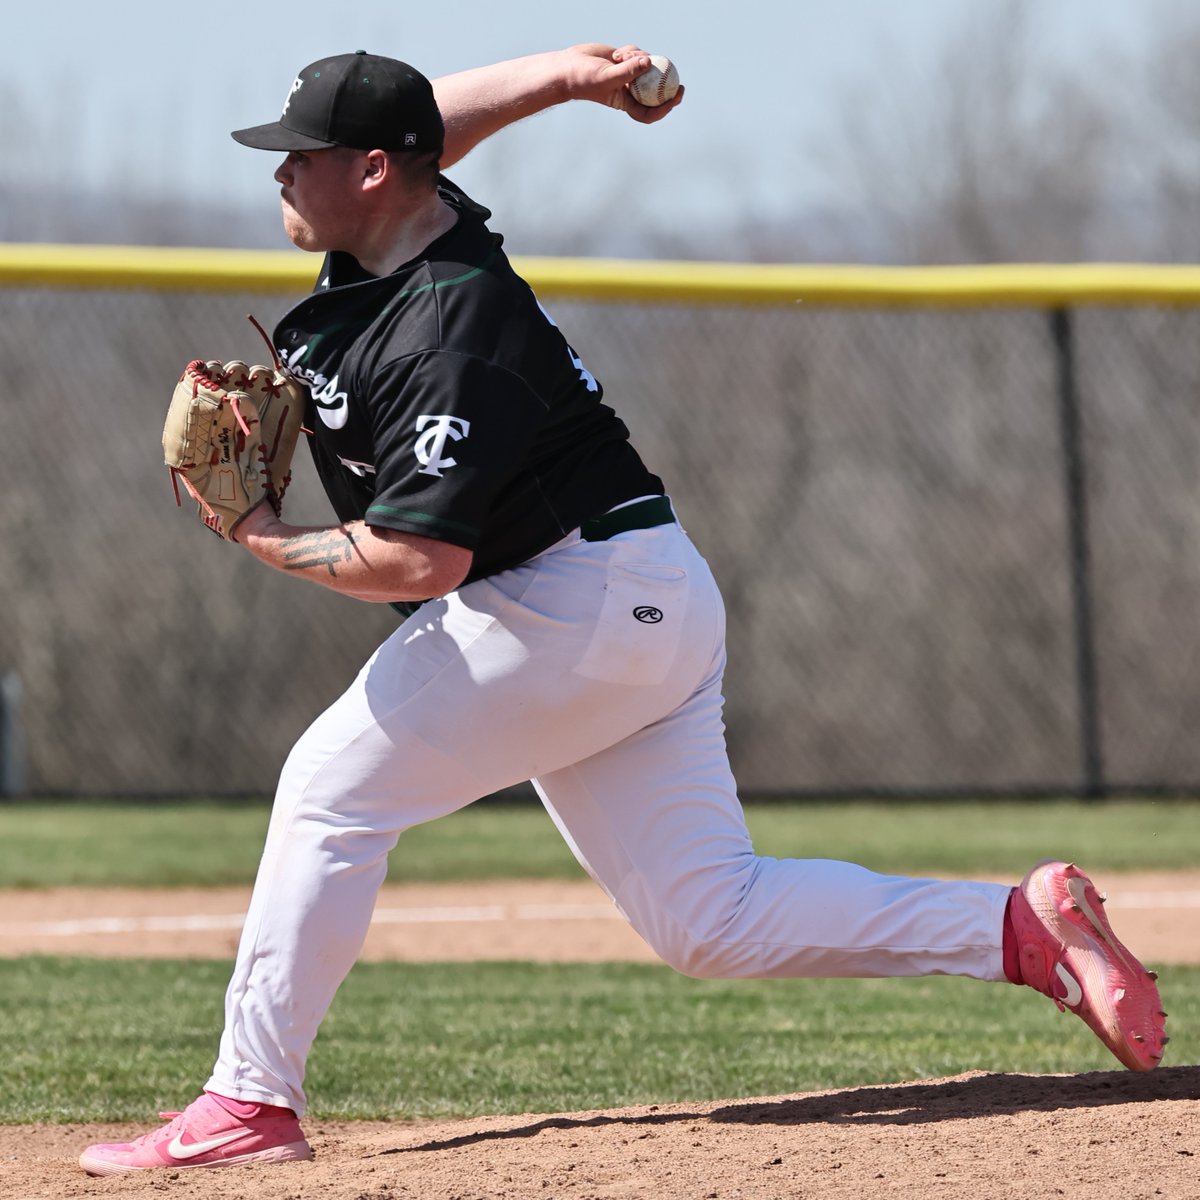 Panthers baseball rallies for first win of the season, beating Finger Lakes 10-4 in 10 innings of game 2 of Sunday's DH. Kannon VanDuzer pitched 7 strong innings and Ryoma Tada pitched 3 innings for the win. Frank Marra had 3 hits, Jason Winstanley had 2 hits and the GW RBI.